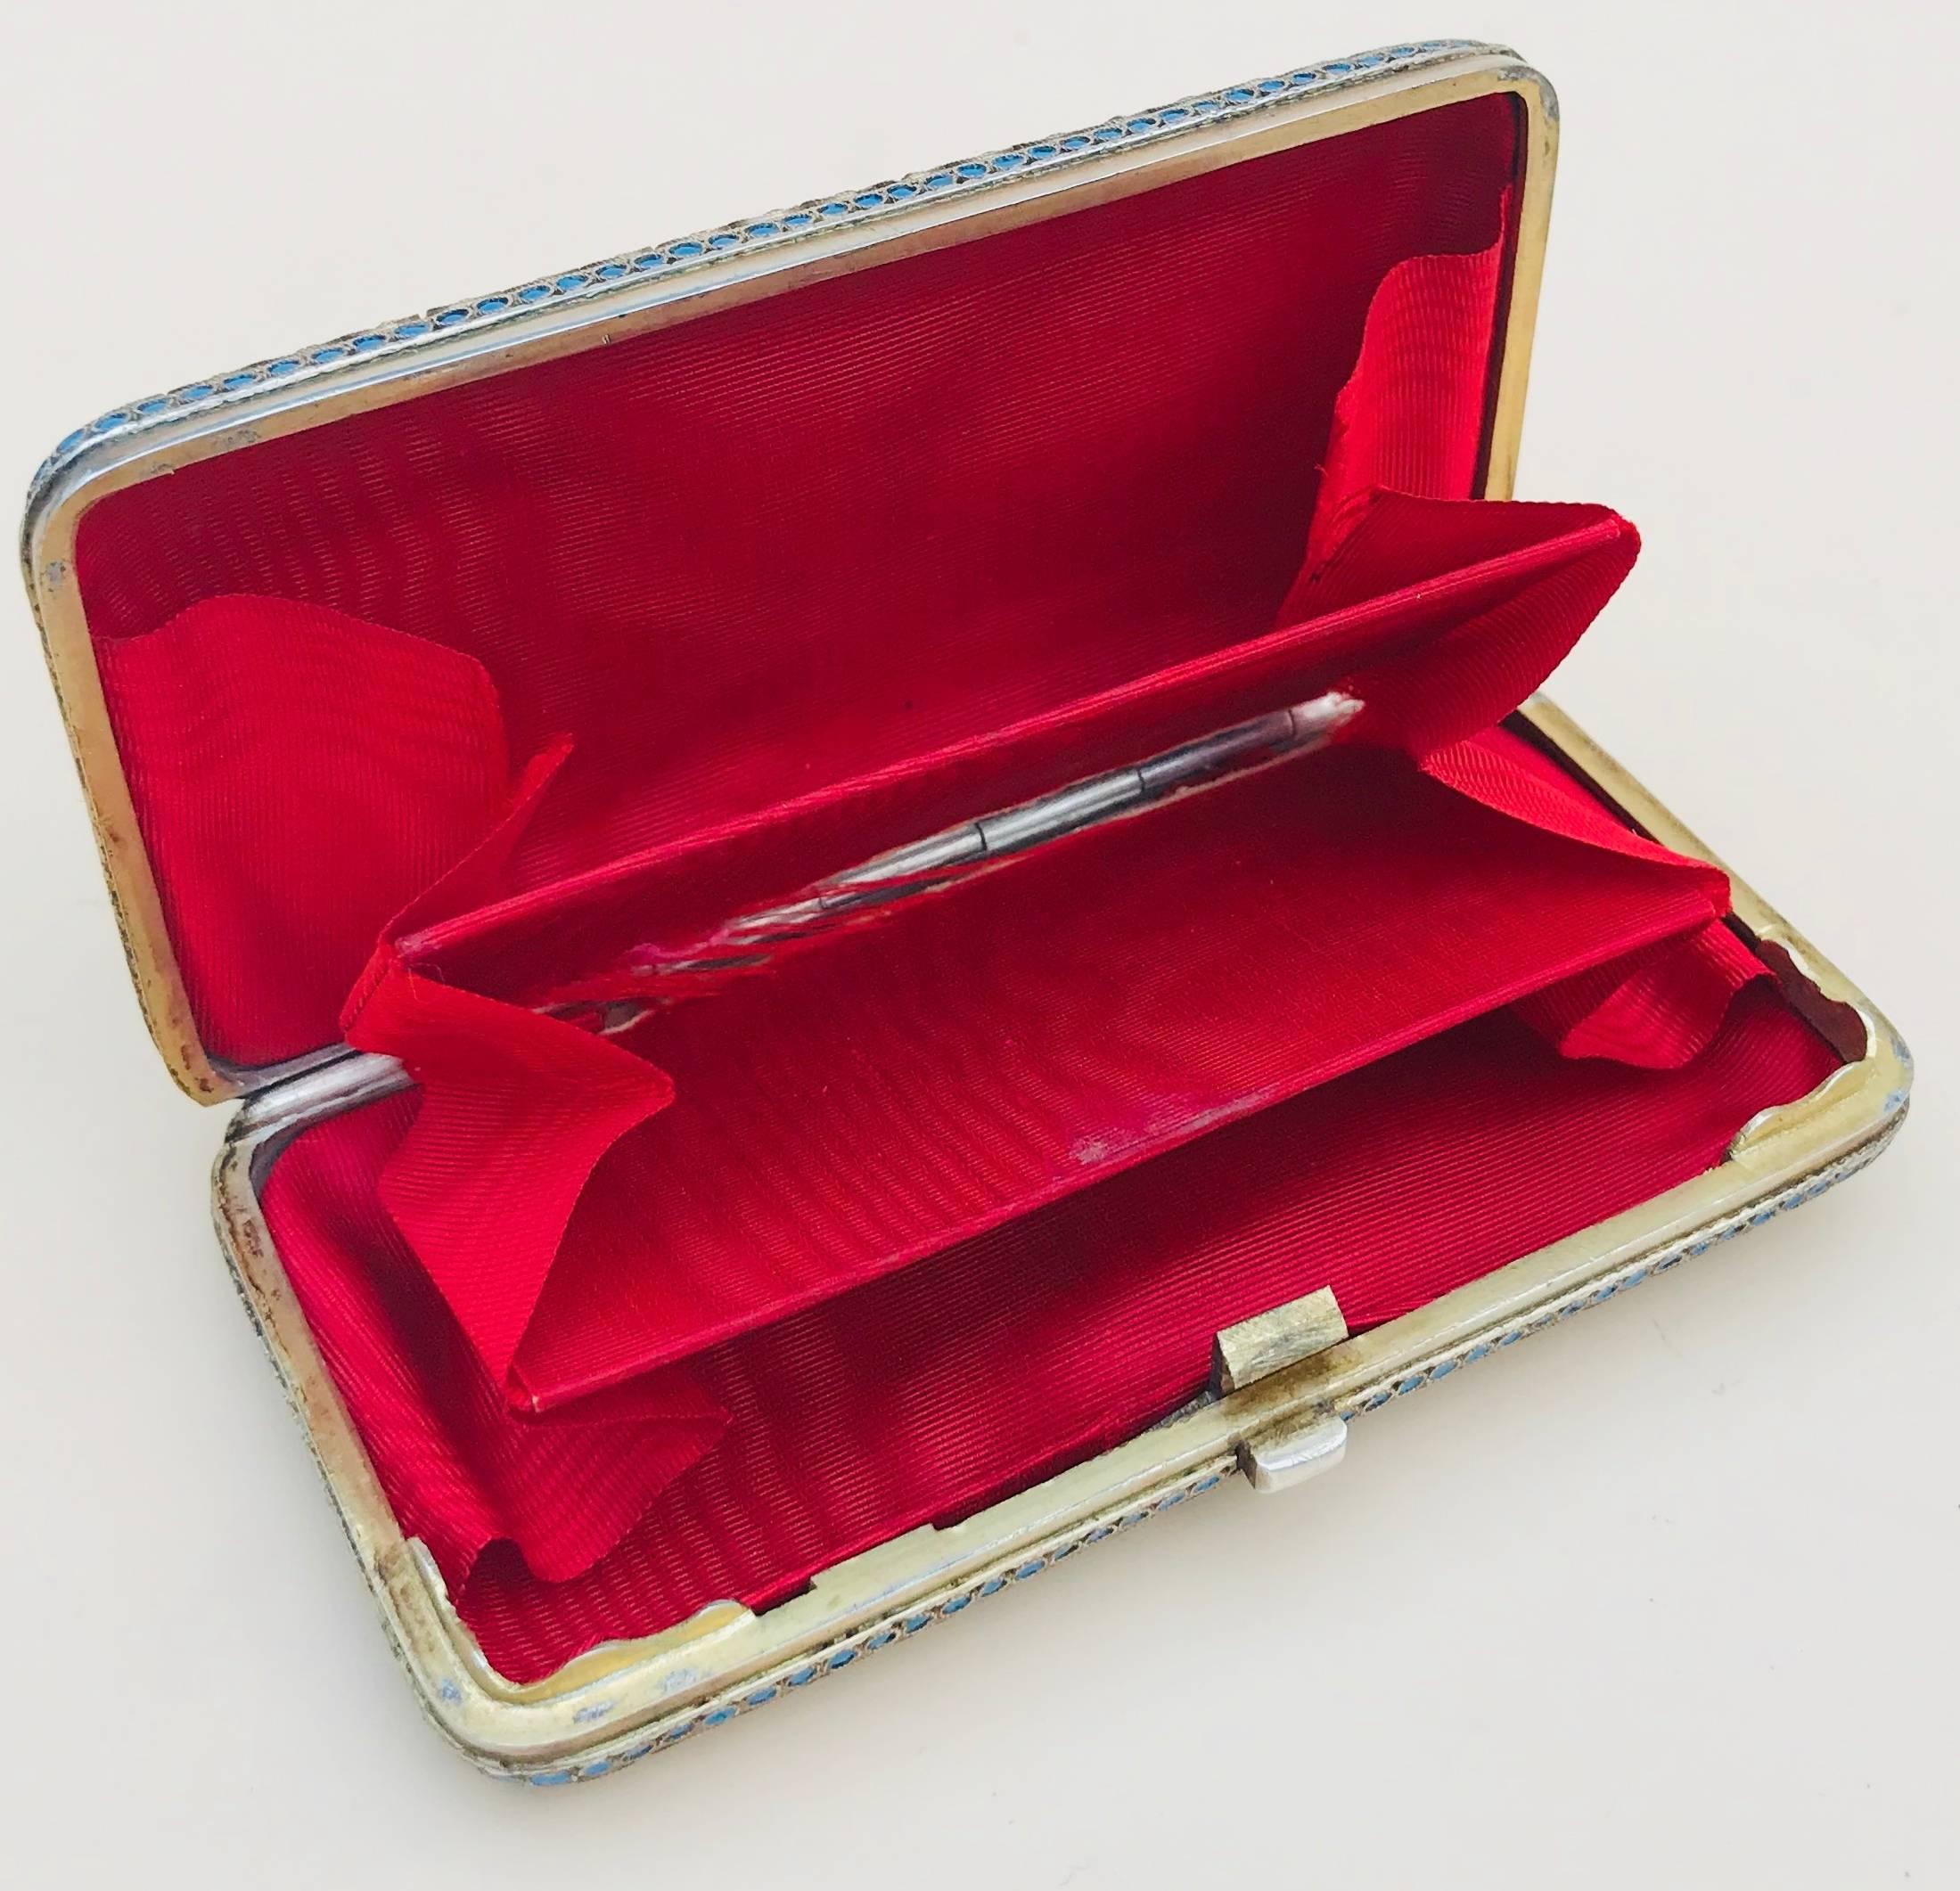 Early 20th century Russian solid silver cloisonné enamel purse or card case

This beautiful piece is lavishly decorated on both sides with a Crimson satin lined interior.
The hinge and clasp are in perfect working order, there is a little wear to